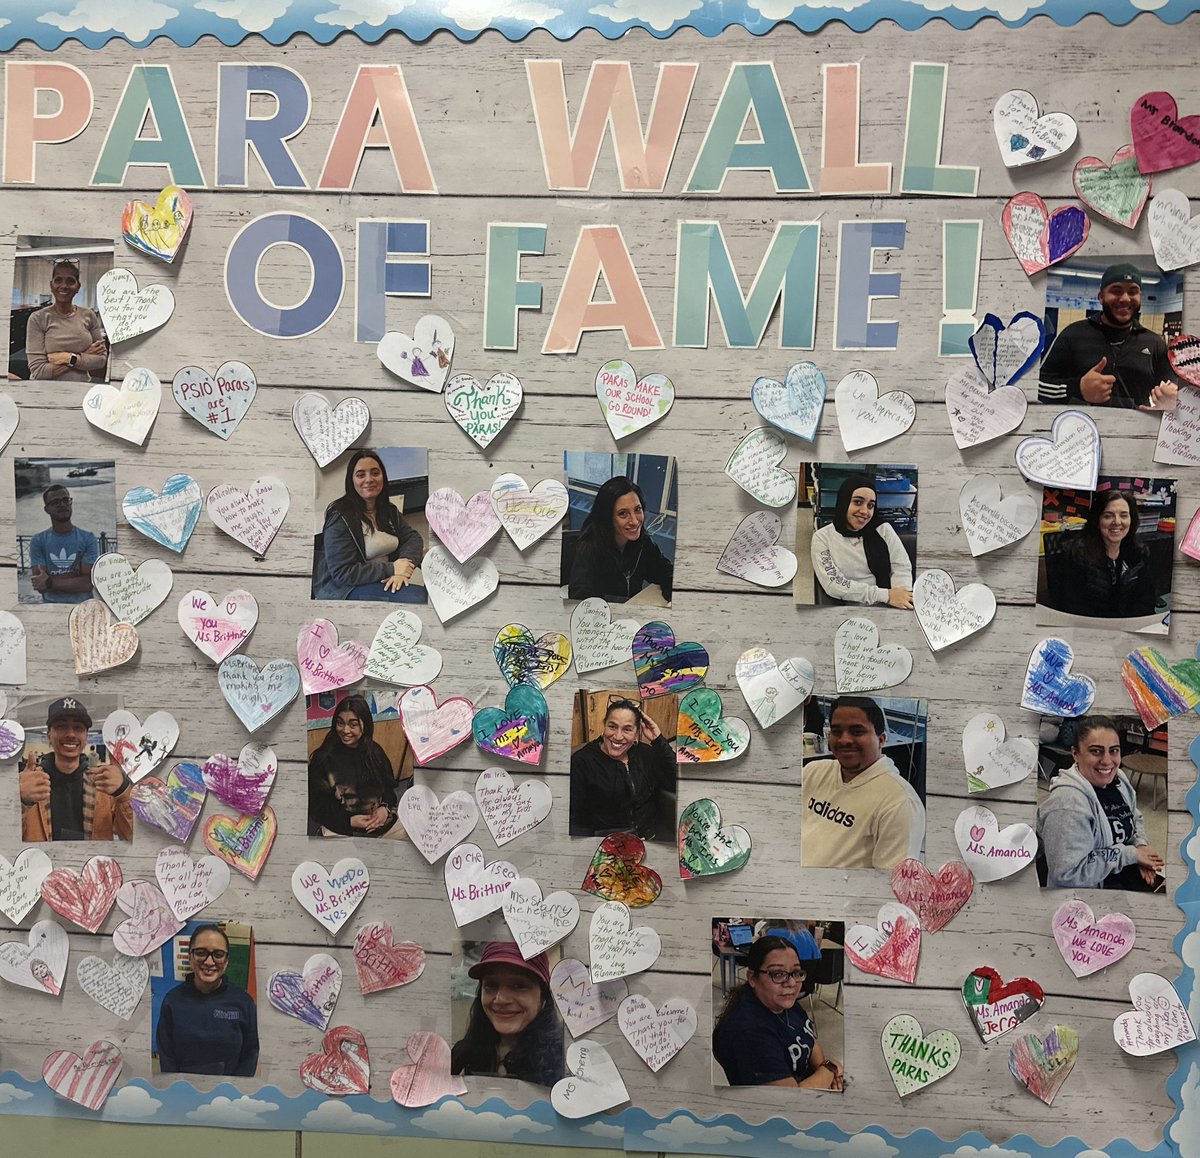 Happy Paraprofessional Appreciation Day to all our amazing Paraprofessionals! Thank you for all you do for our students and to make Fort Hill Great! 💕 #YouHaveAFriendAtPS10 @jenn_funes @teacherromero72 @DrMarionWilson @CChavezD31 @CSD31SI